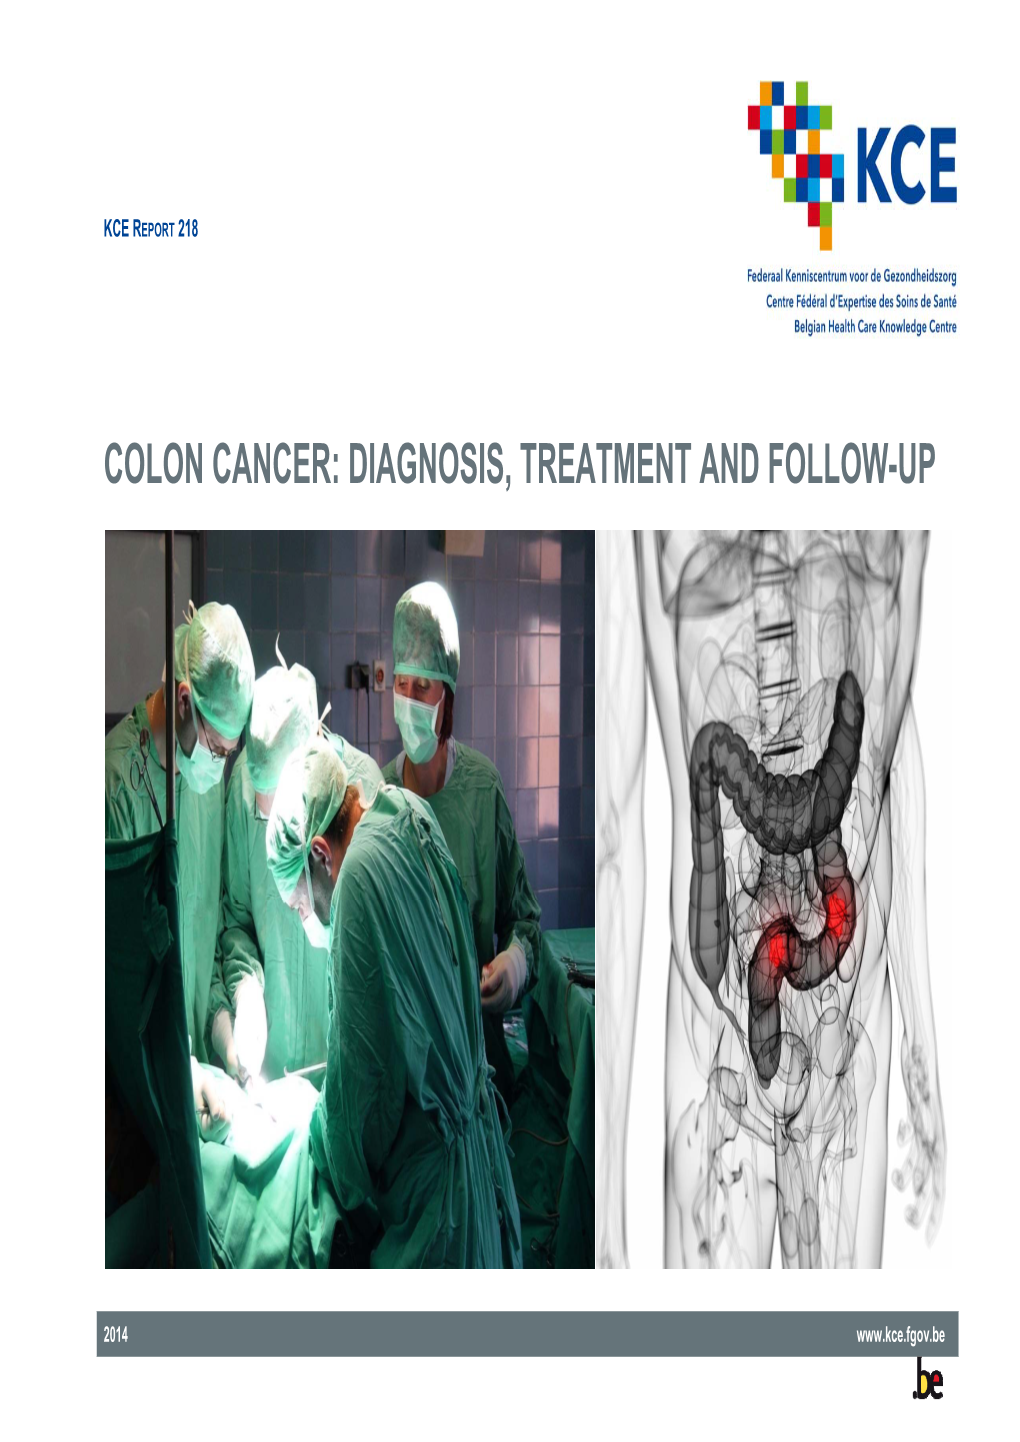 Colon Cancer: Diagnosis, Treatment and Follow-Up